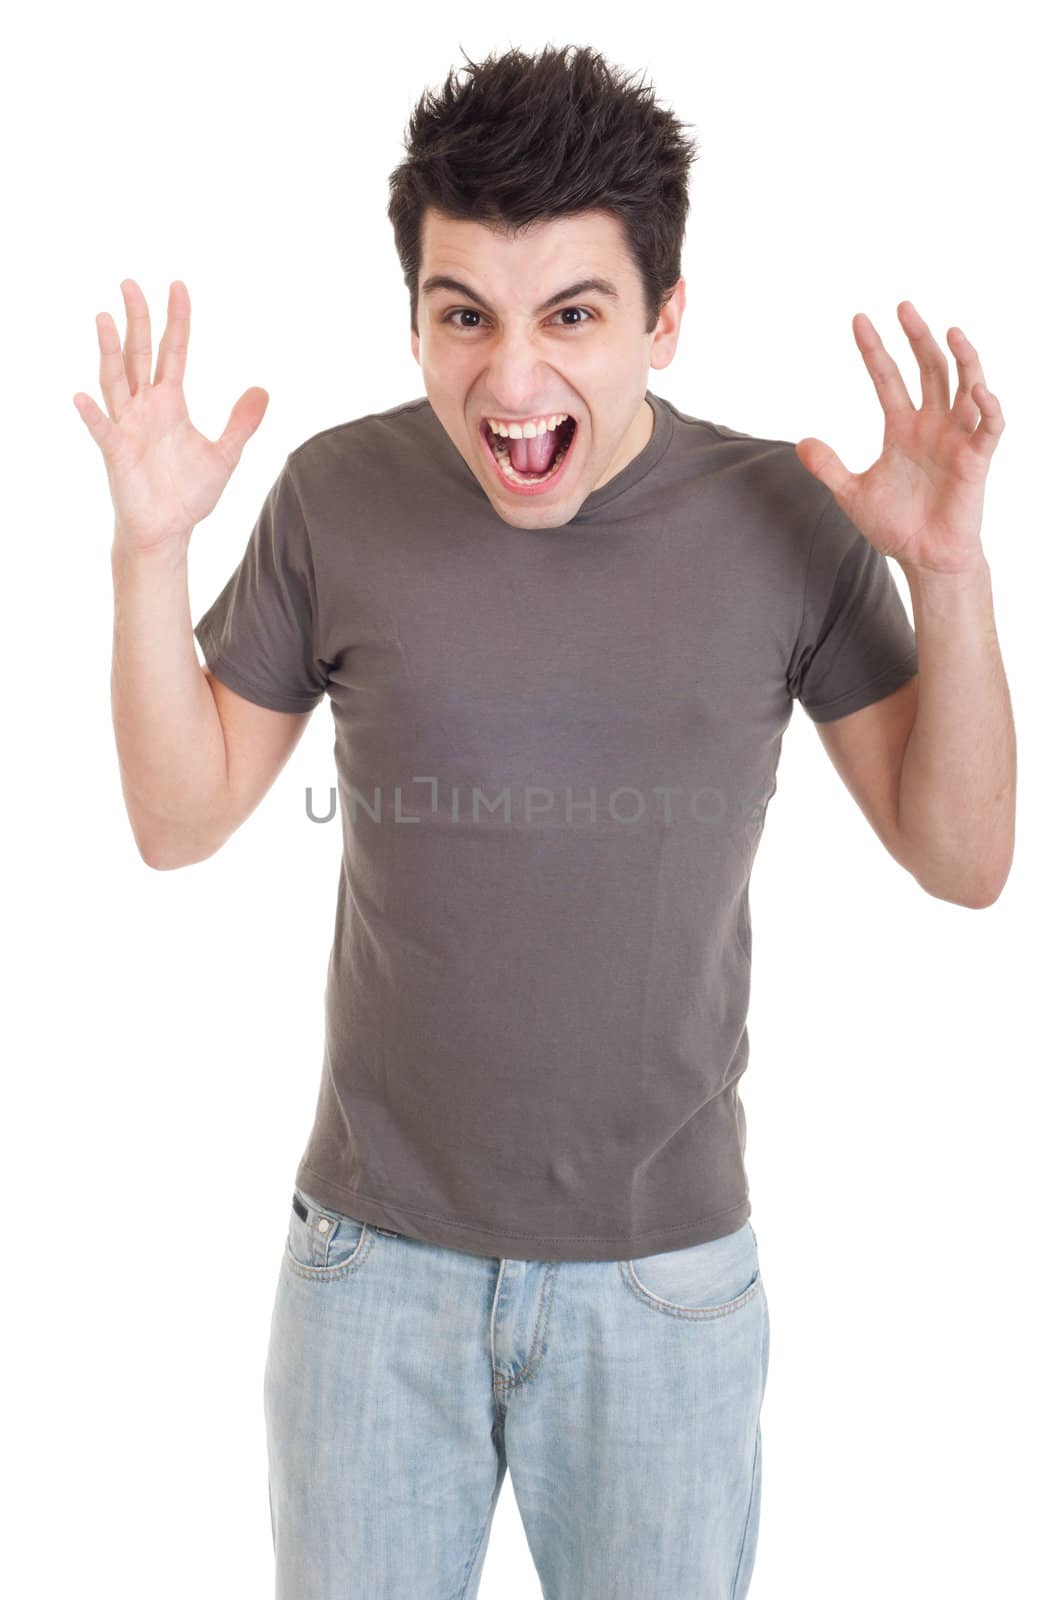 very angry casual man screaming isolated on white background